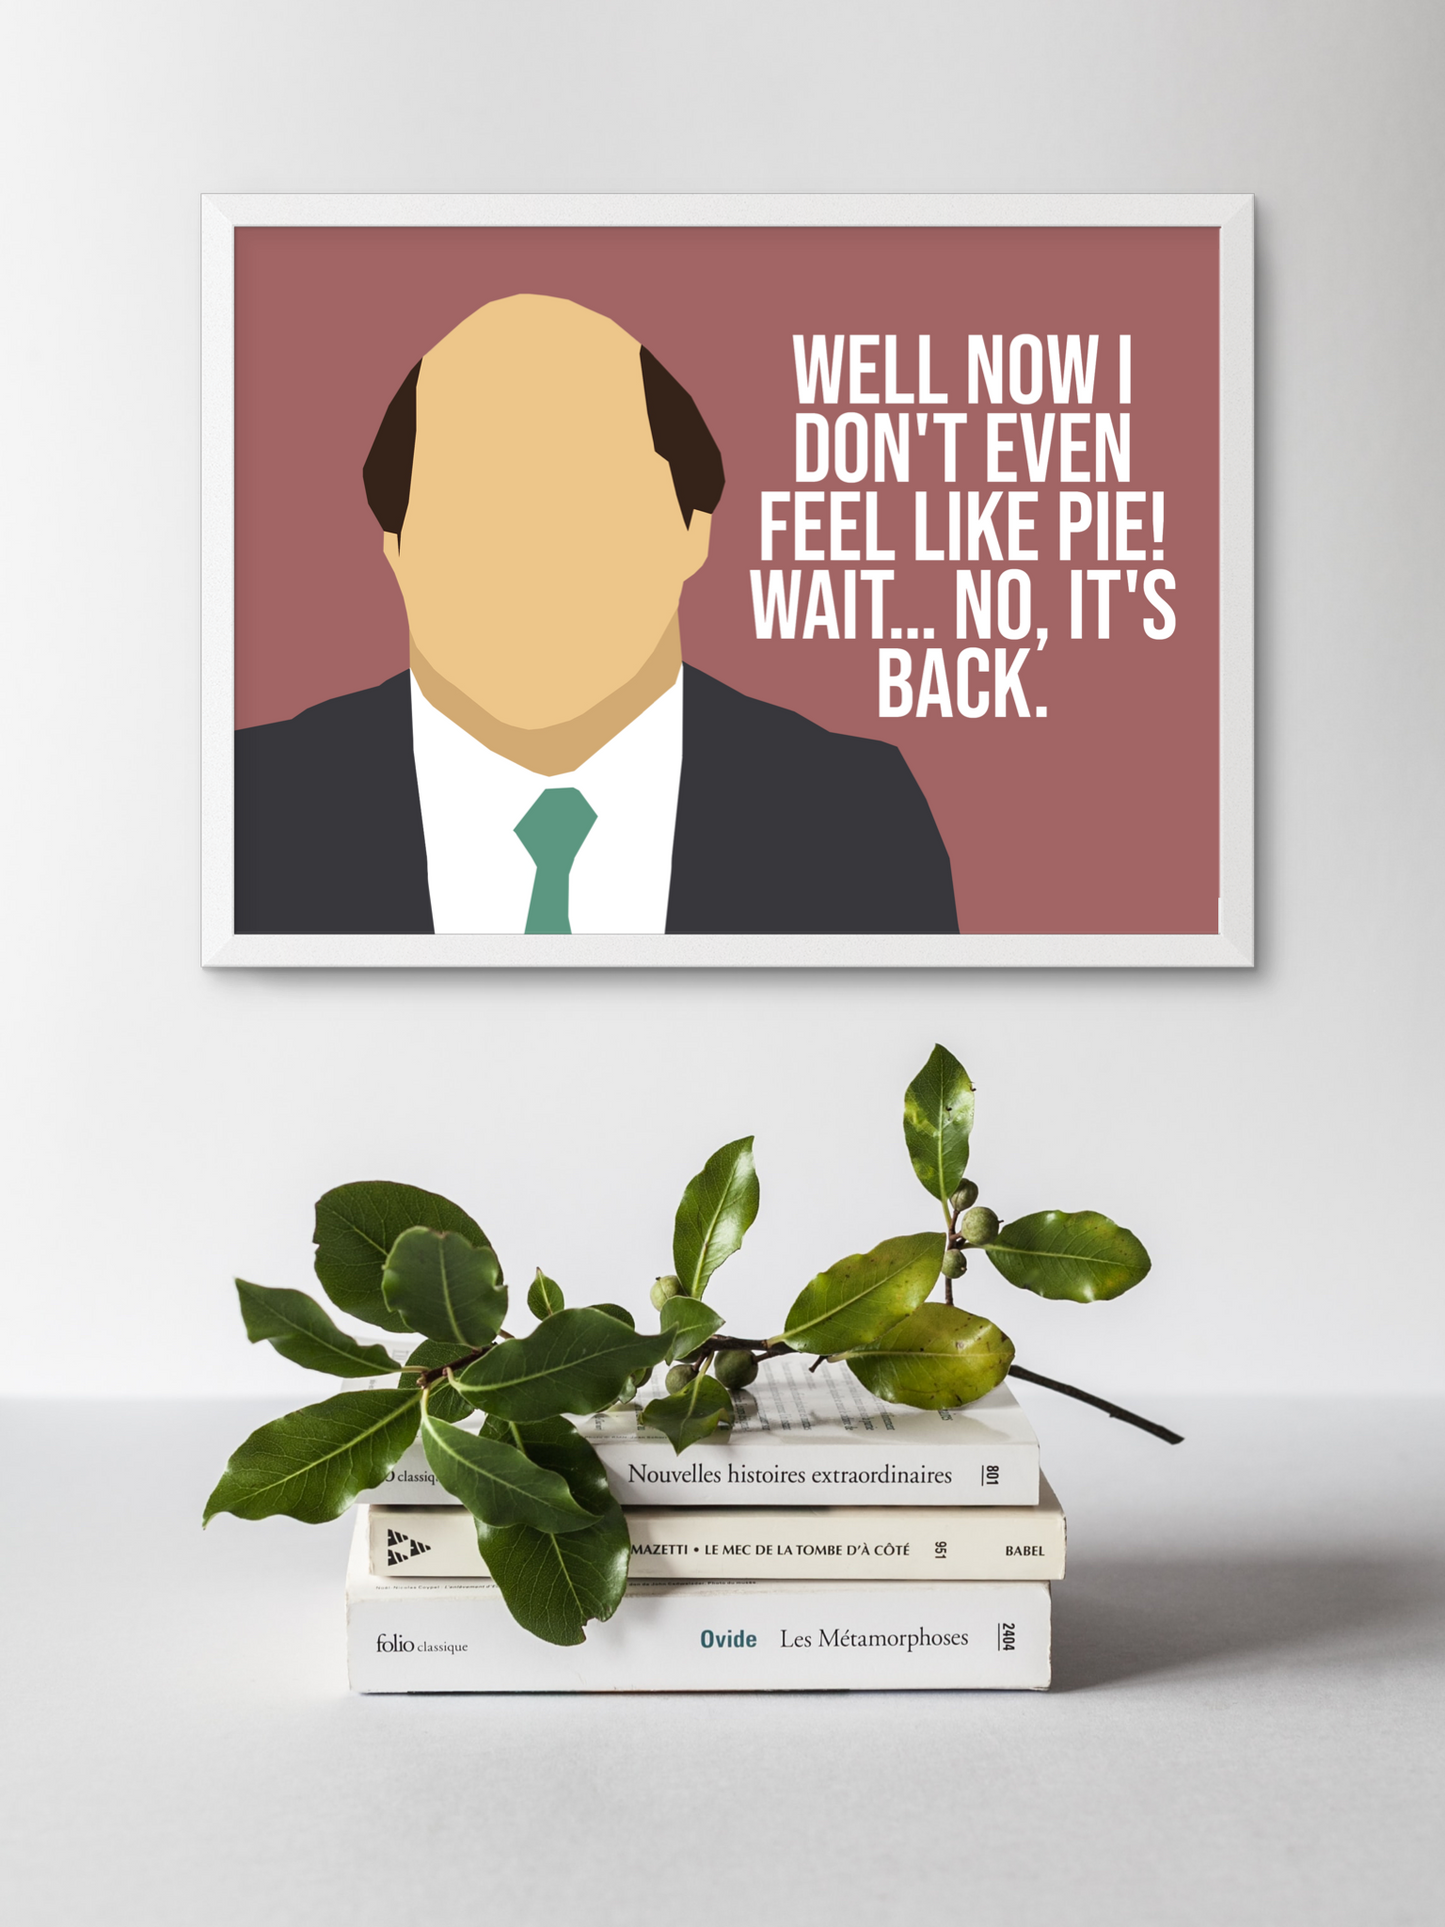 kevin malone funny pie quote from The Office